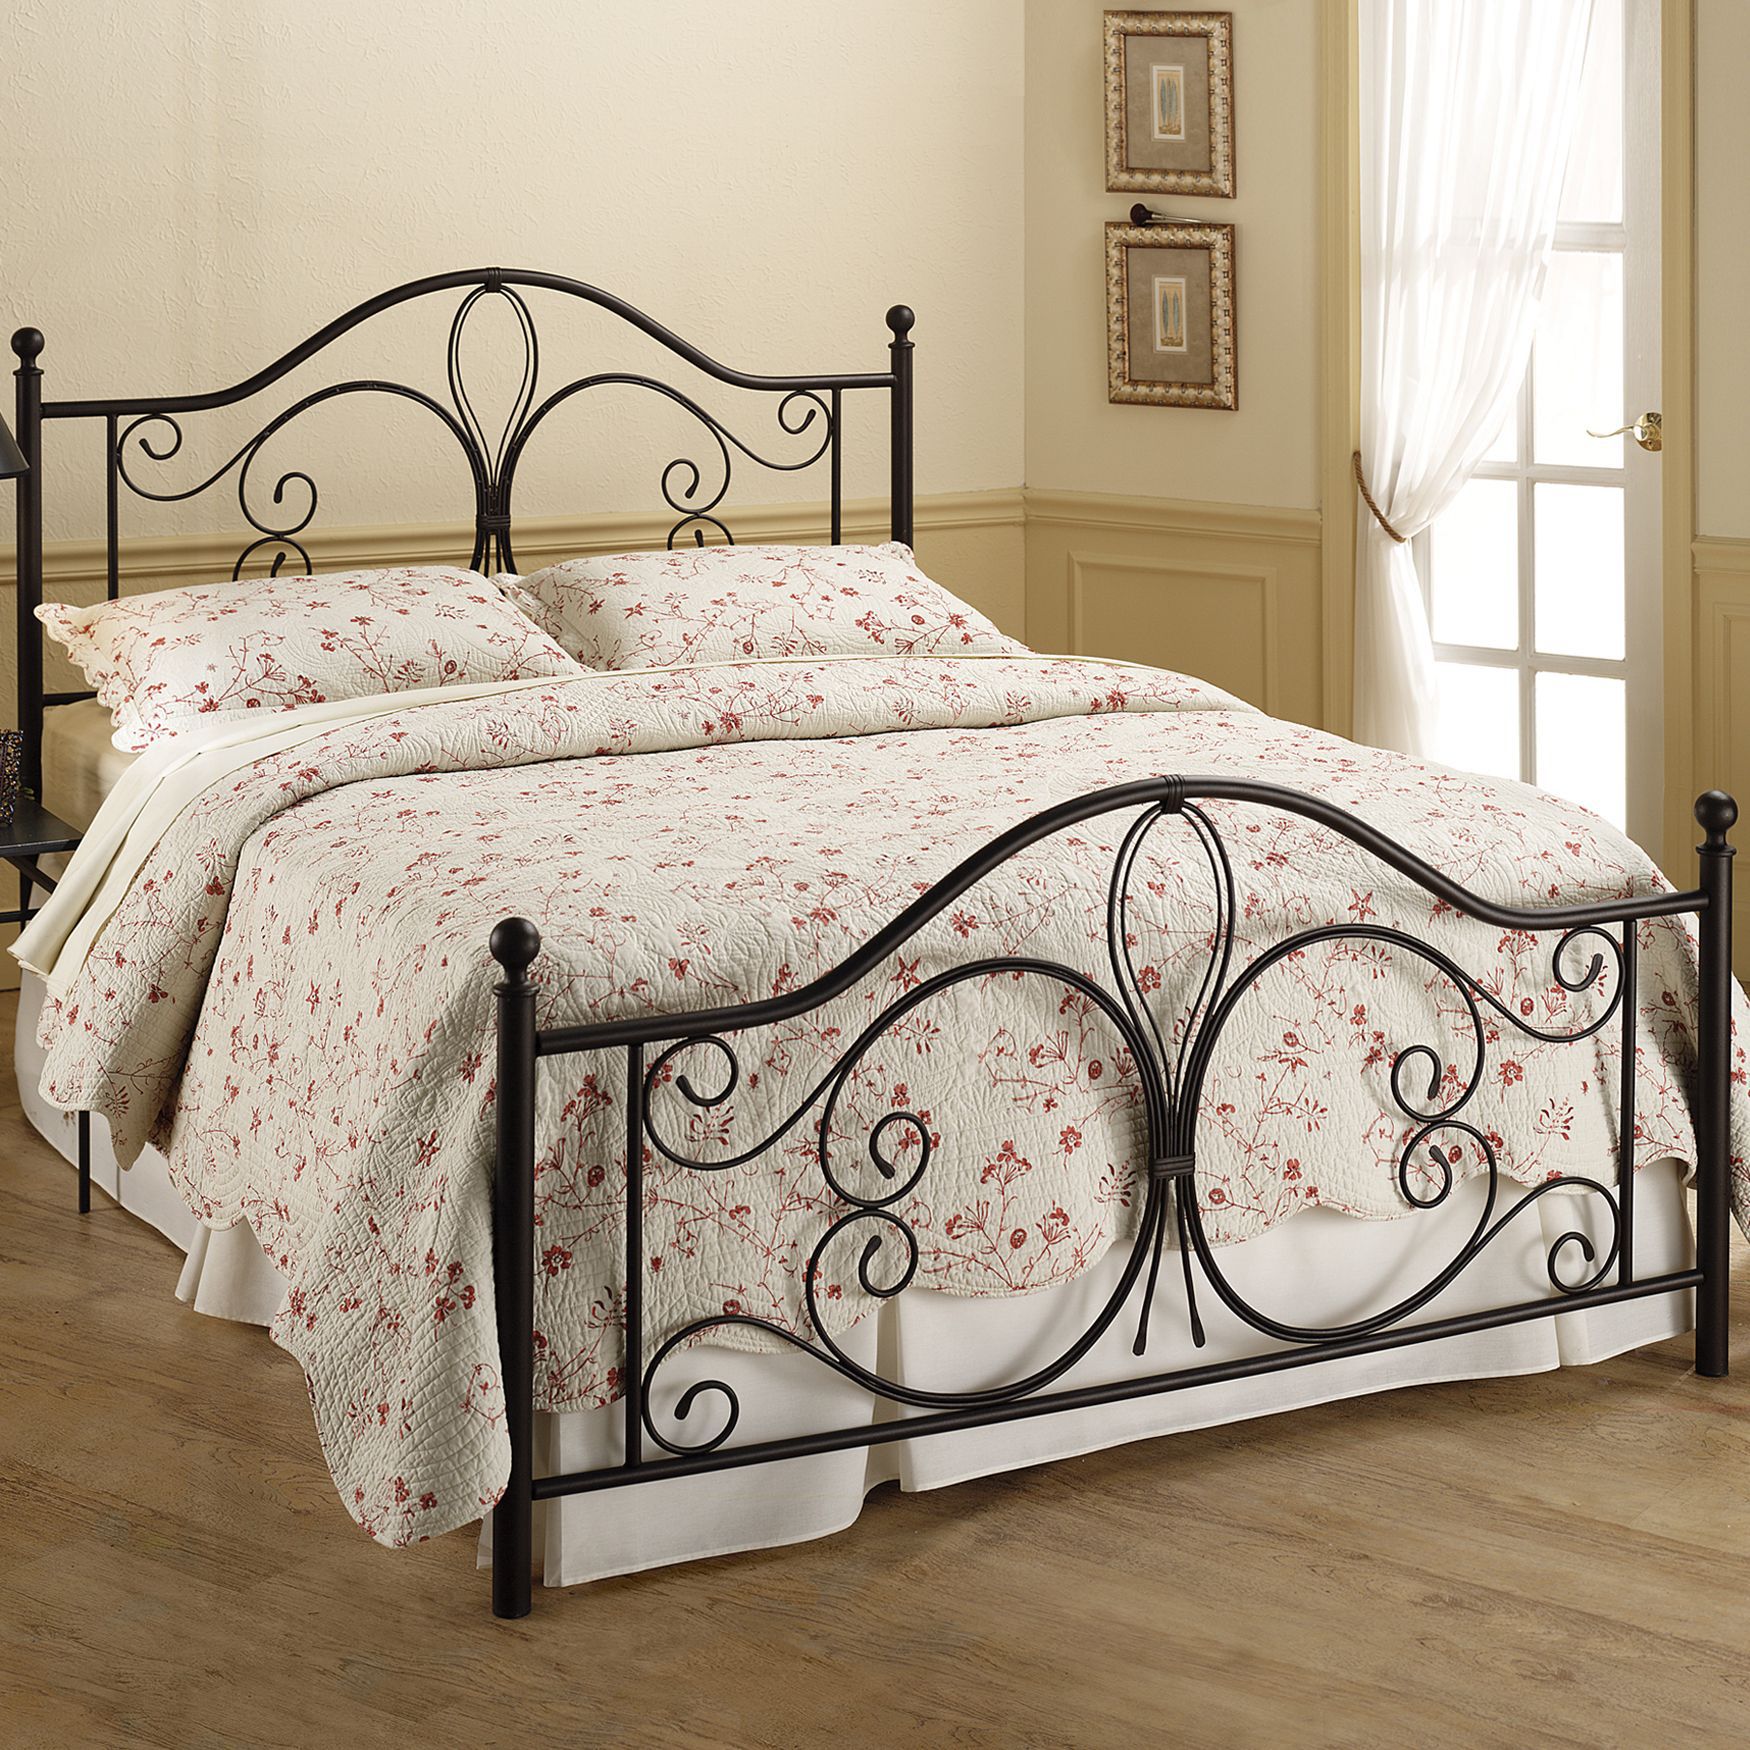 Queen Bed Set with Bed Frame, 83?"Lx61?"Wx49?"H | Brylane Home